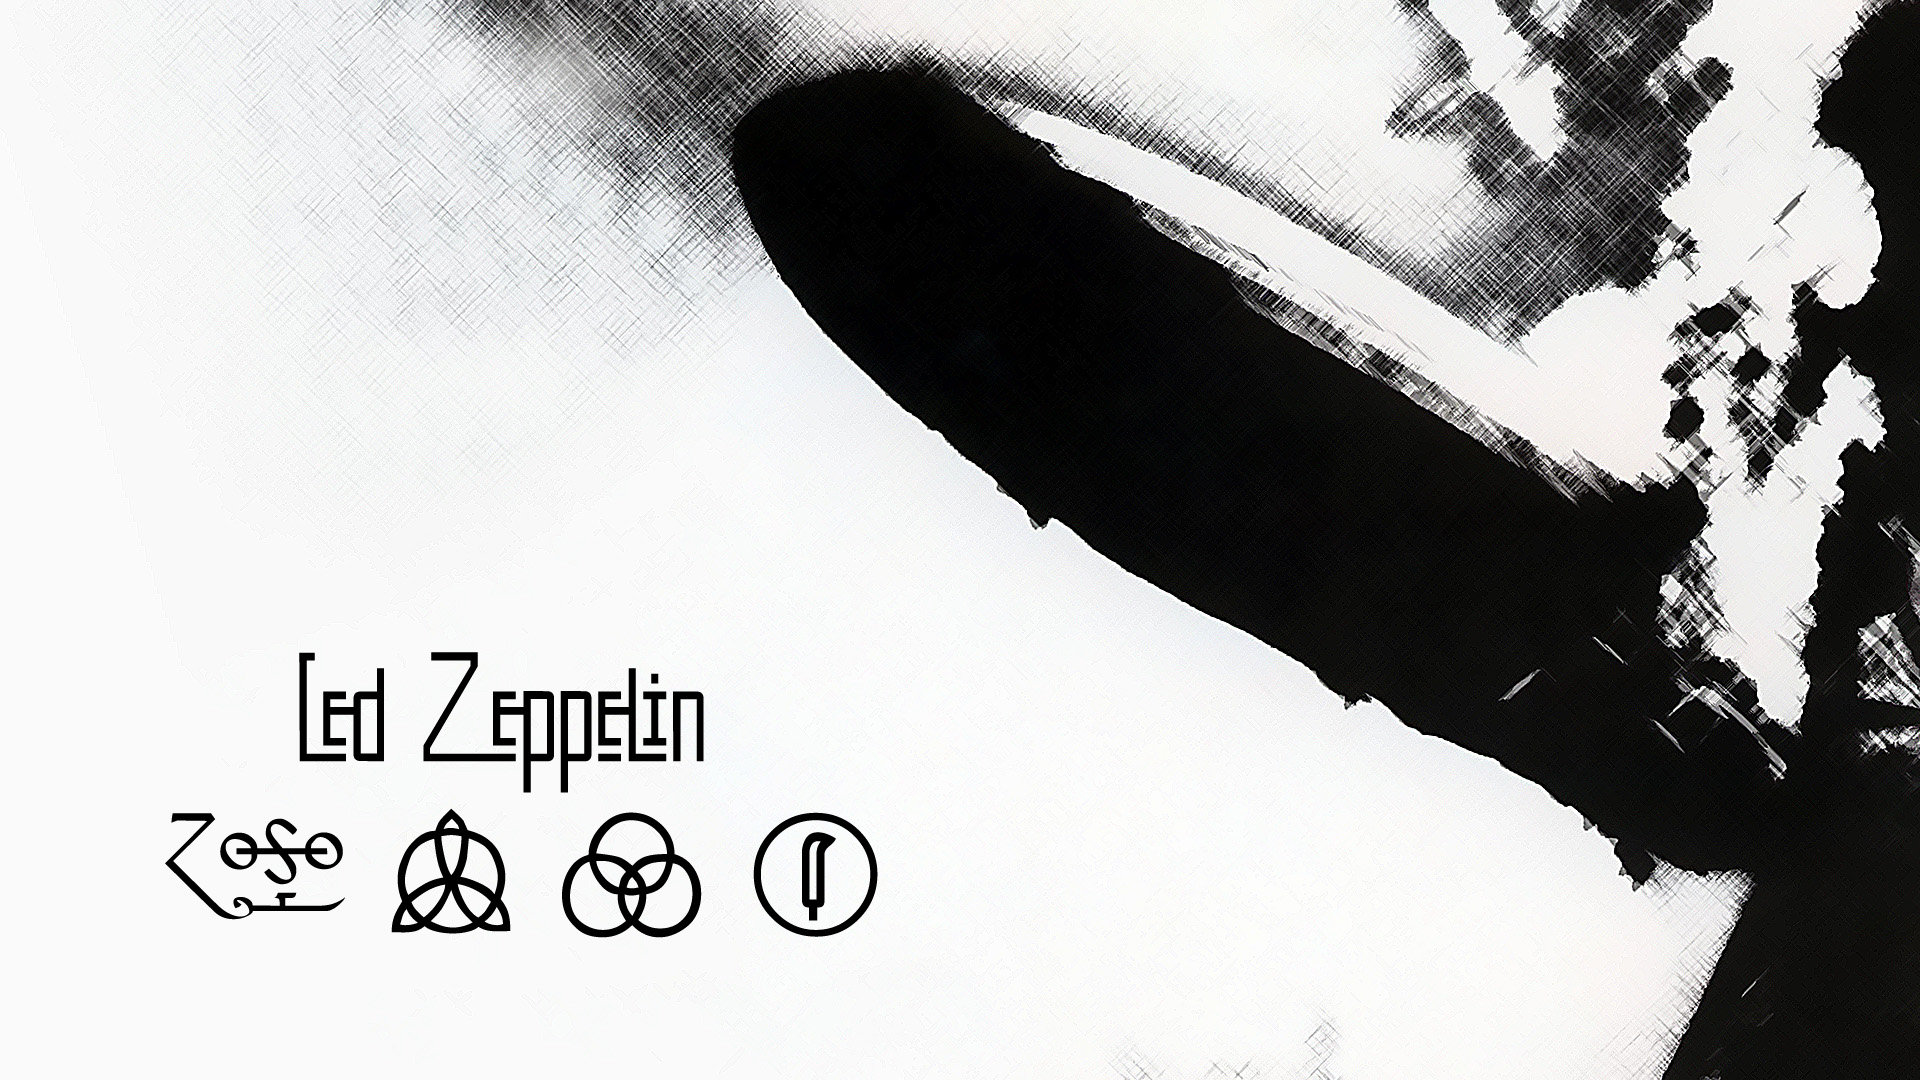 Led Zeppelin Wallpapers Hd For Desktop Backgrounds Images, Photos, Reviews